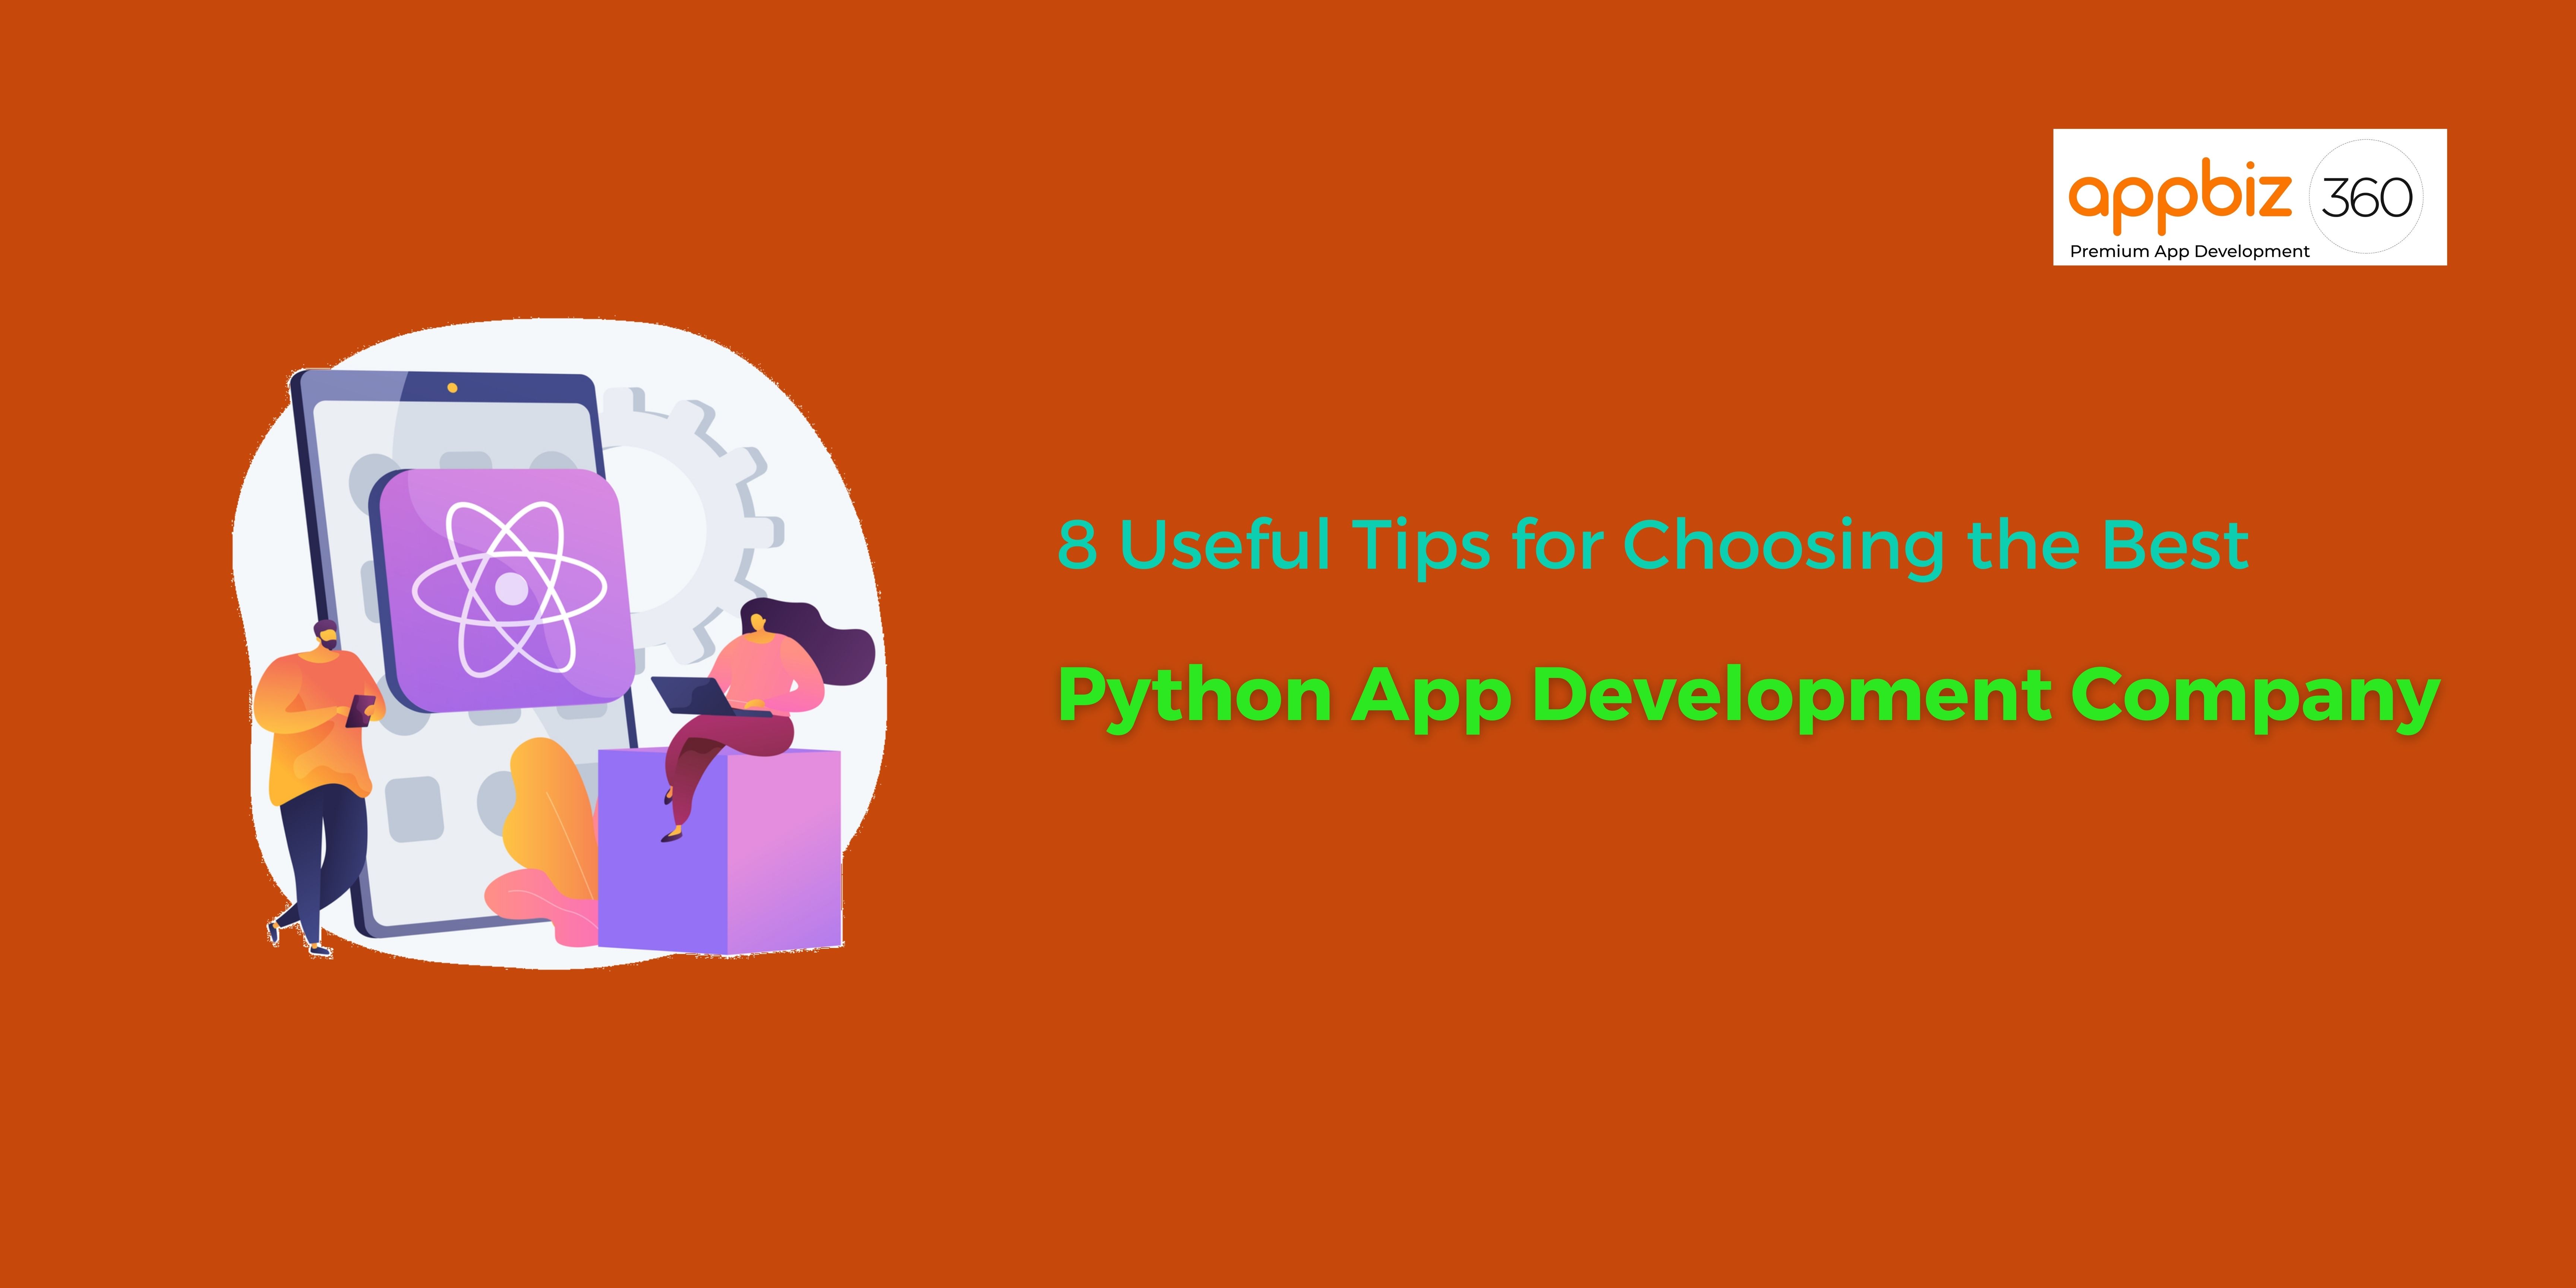 8 Useful Tips for Choosing the Best Python App Development Company